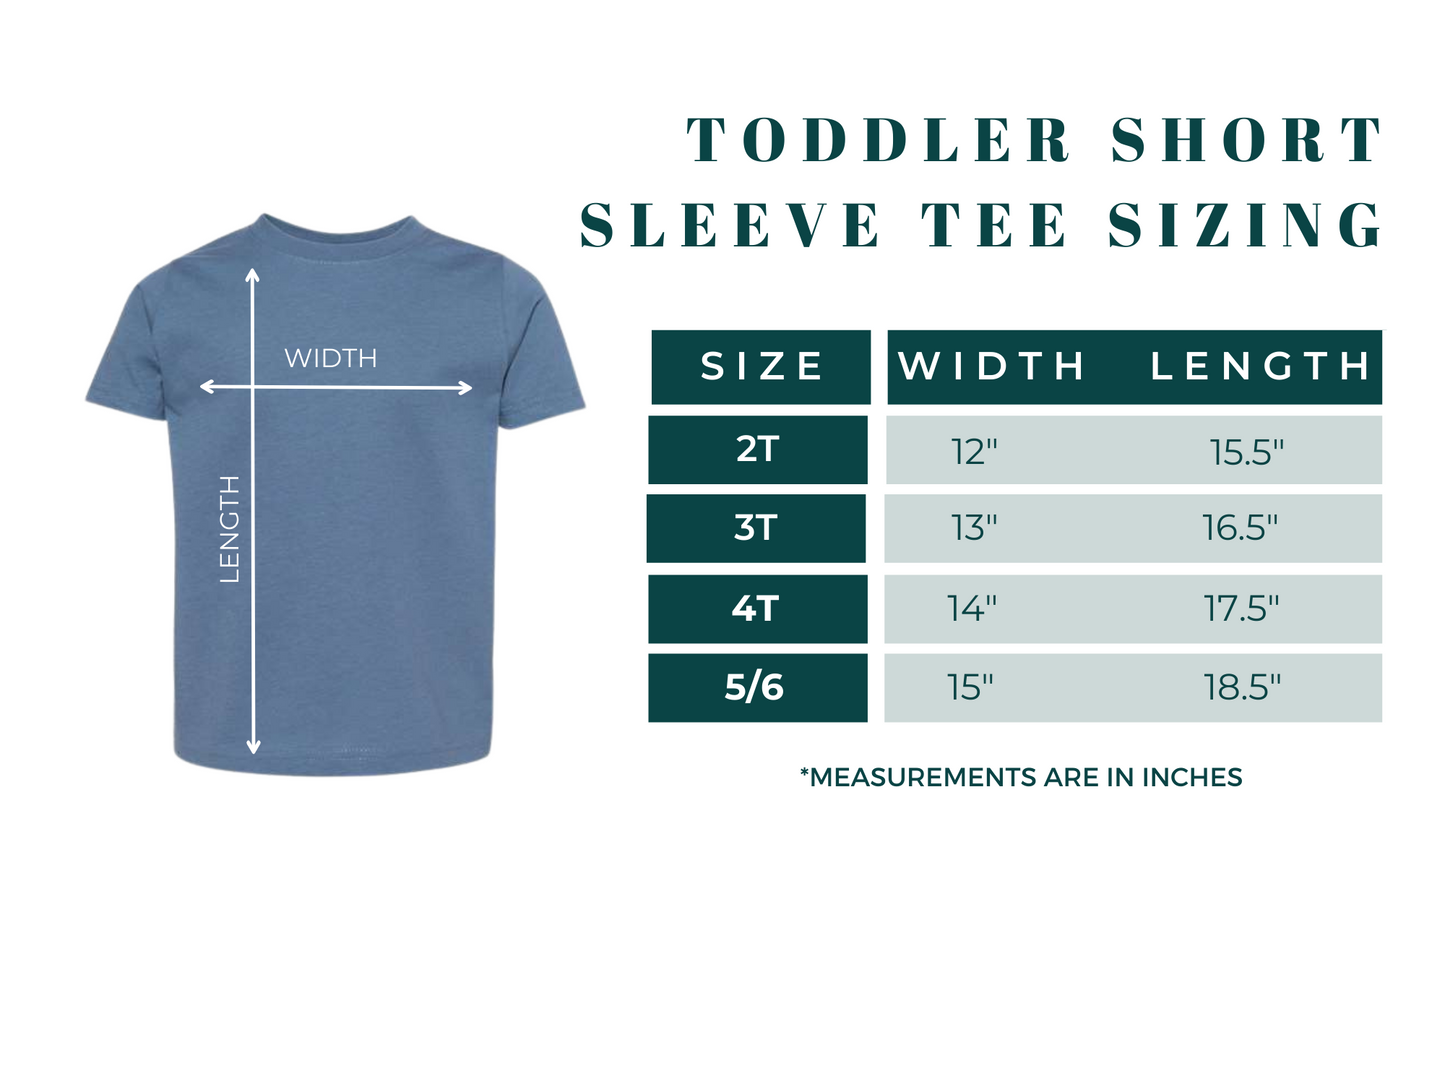 Make Your Own Magic | Short Sleeve Toddler Tee | Closeout